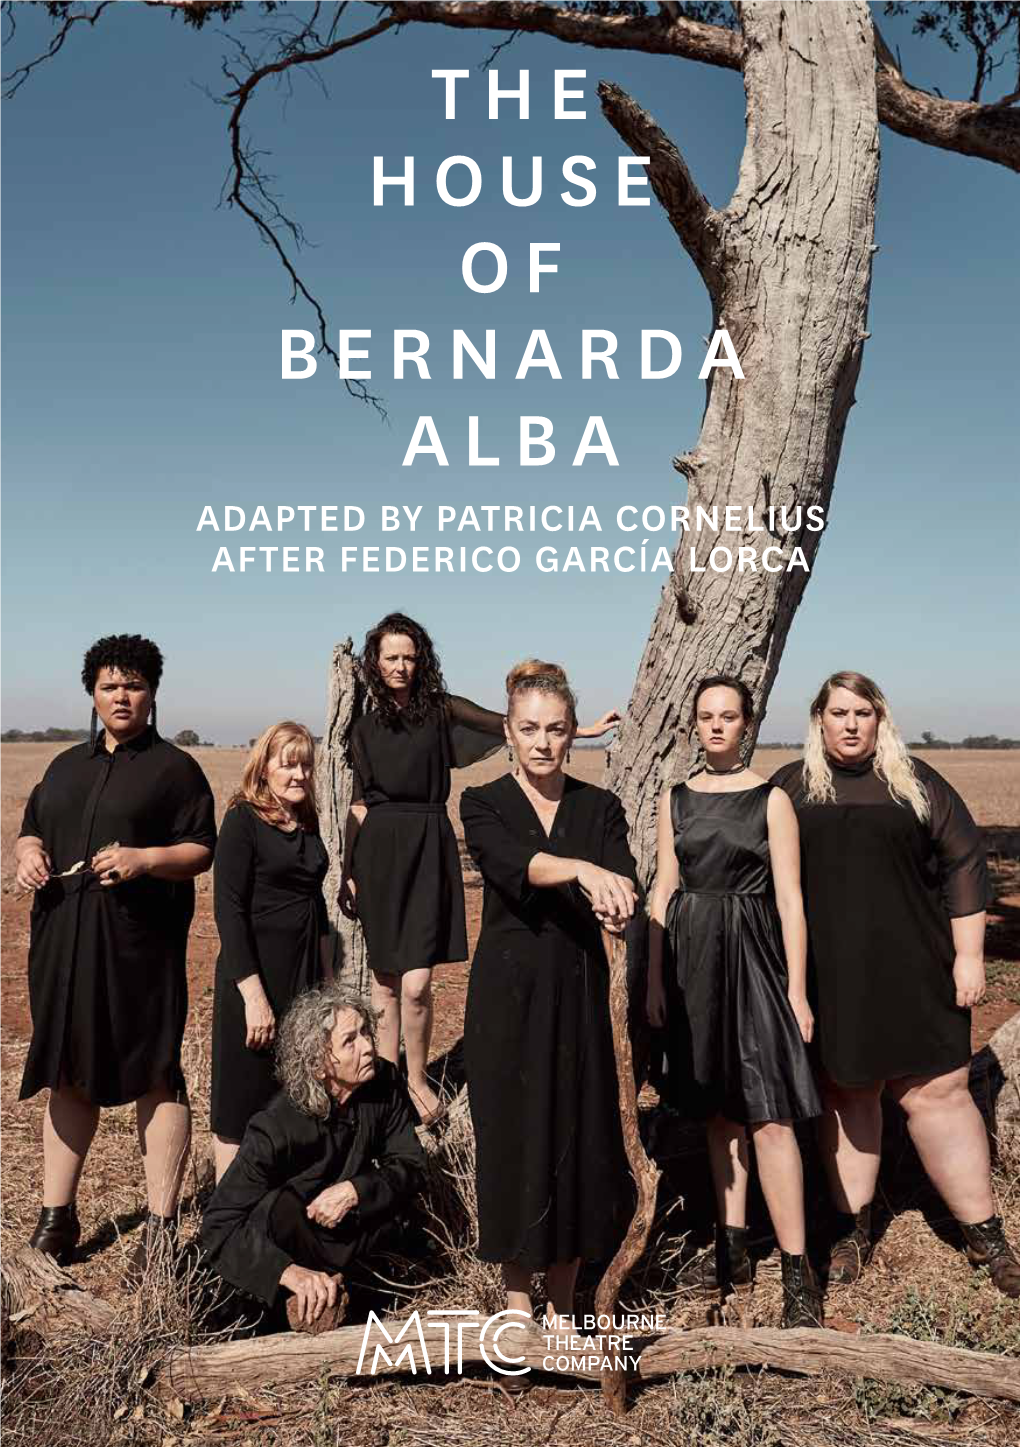 The House of Bernarda Alba Brings Together the Prolific Talents of Playwright Patricia Cornelius and Former MTC Associate Director Leticia Cáceres